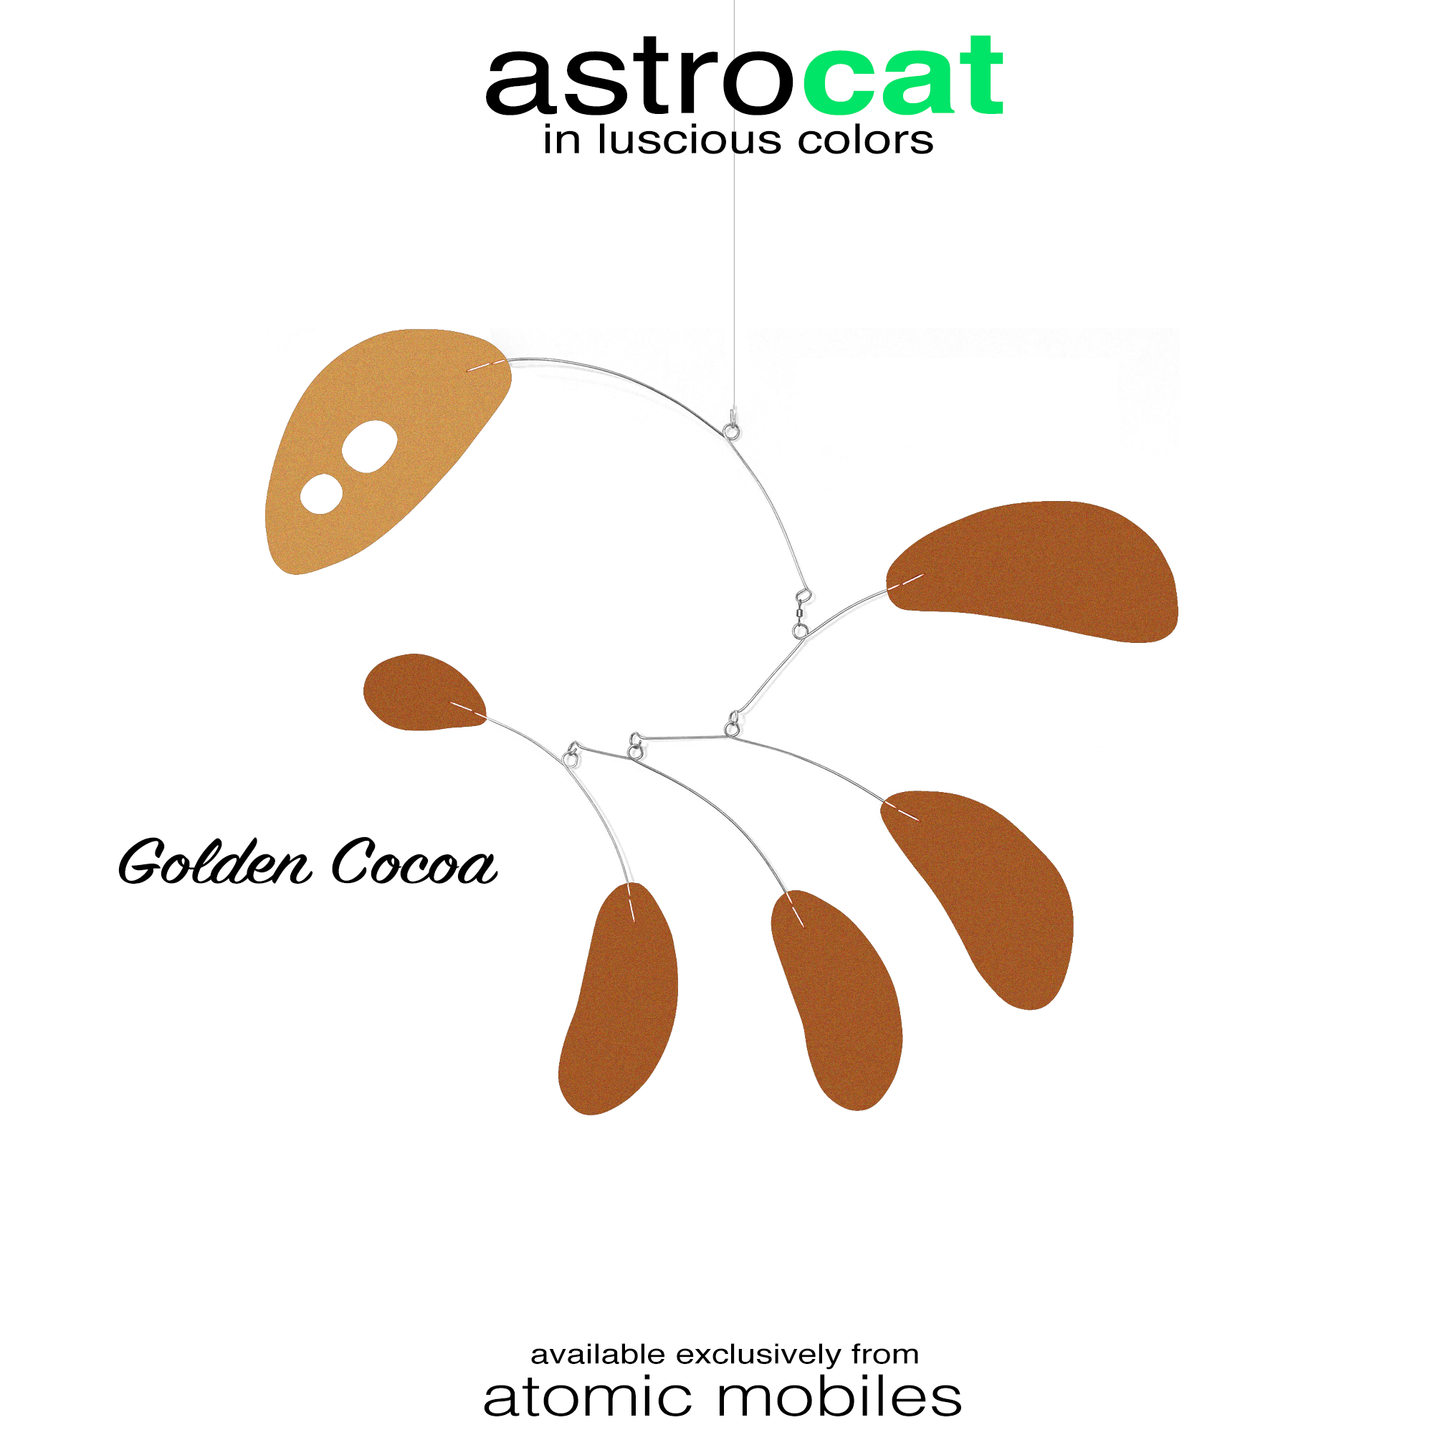 GROOVECATS AstroCat style kinetic hanging art mobile in Fall Colors of brown and metallic gold -- called Golden Cocoa --by AtomicMobiles.com